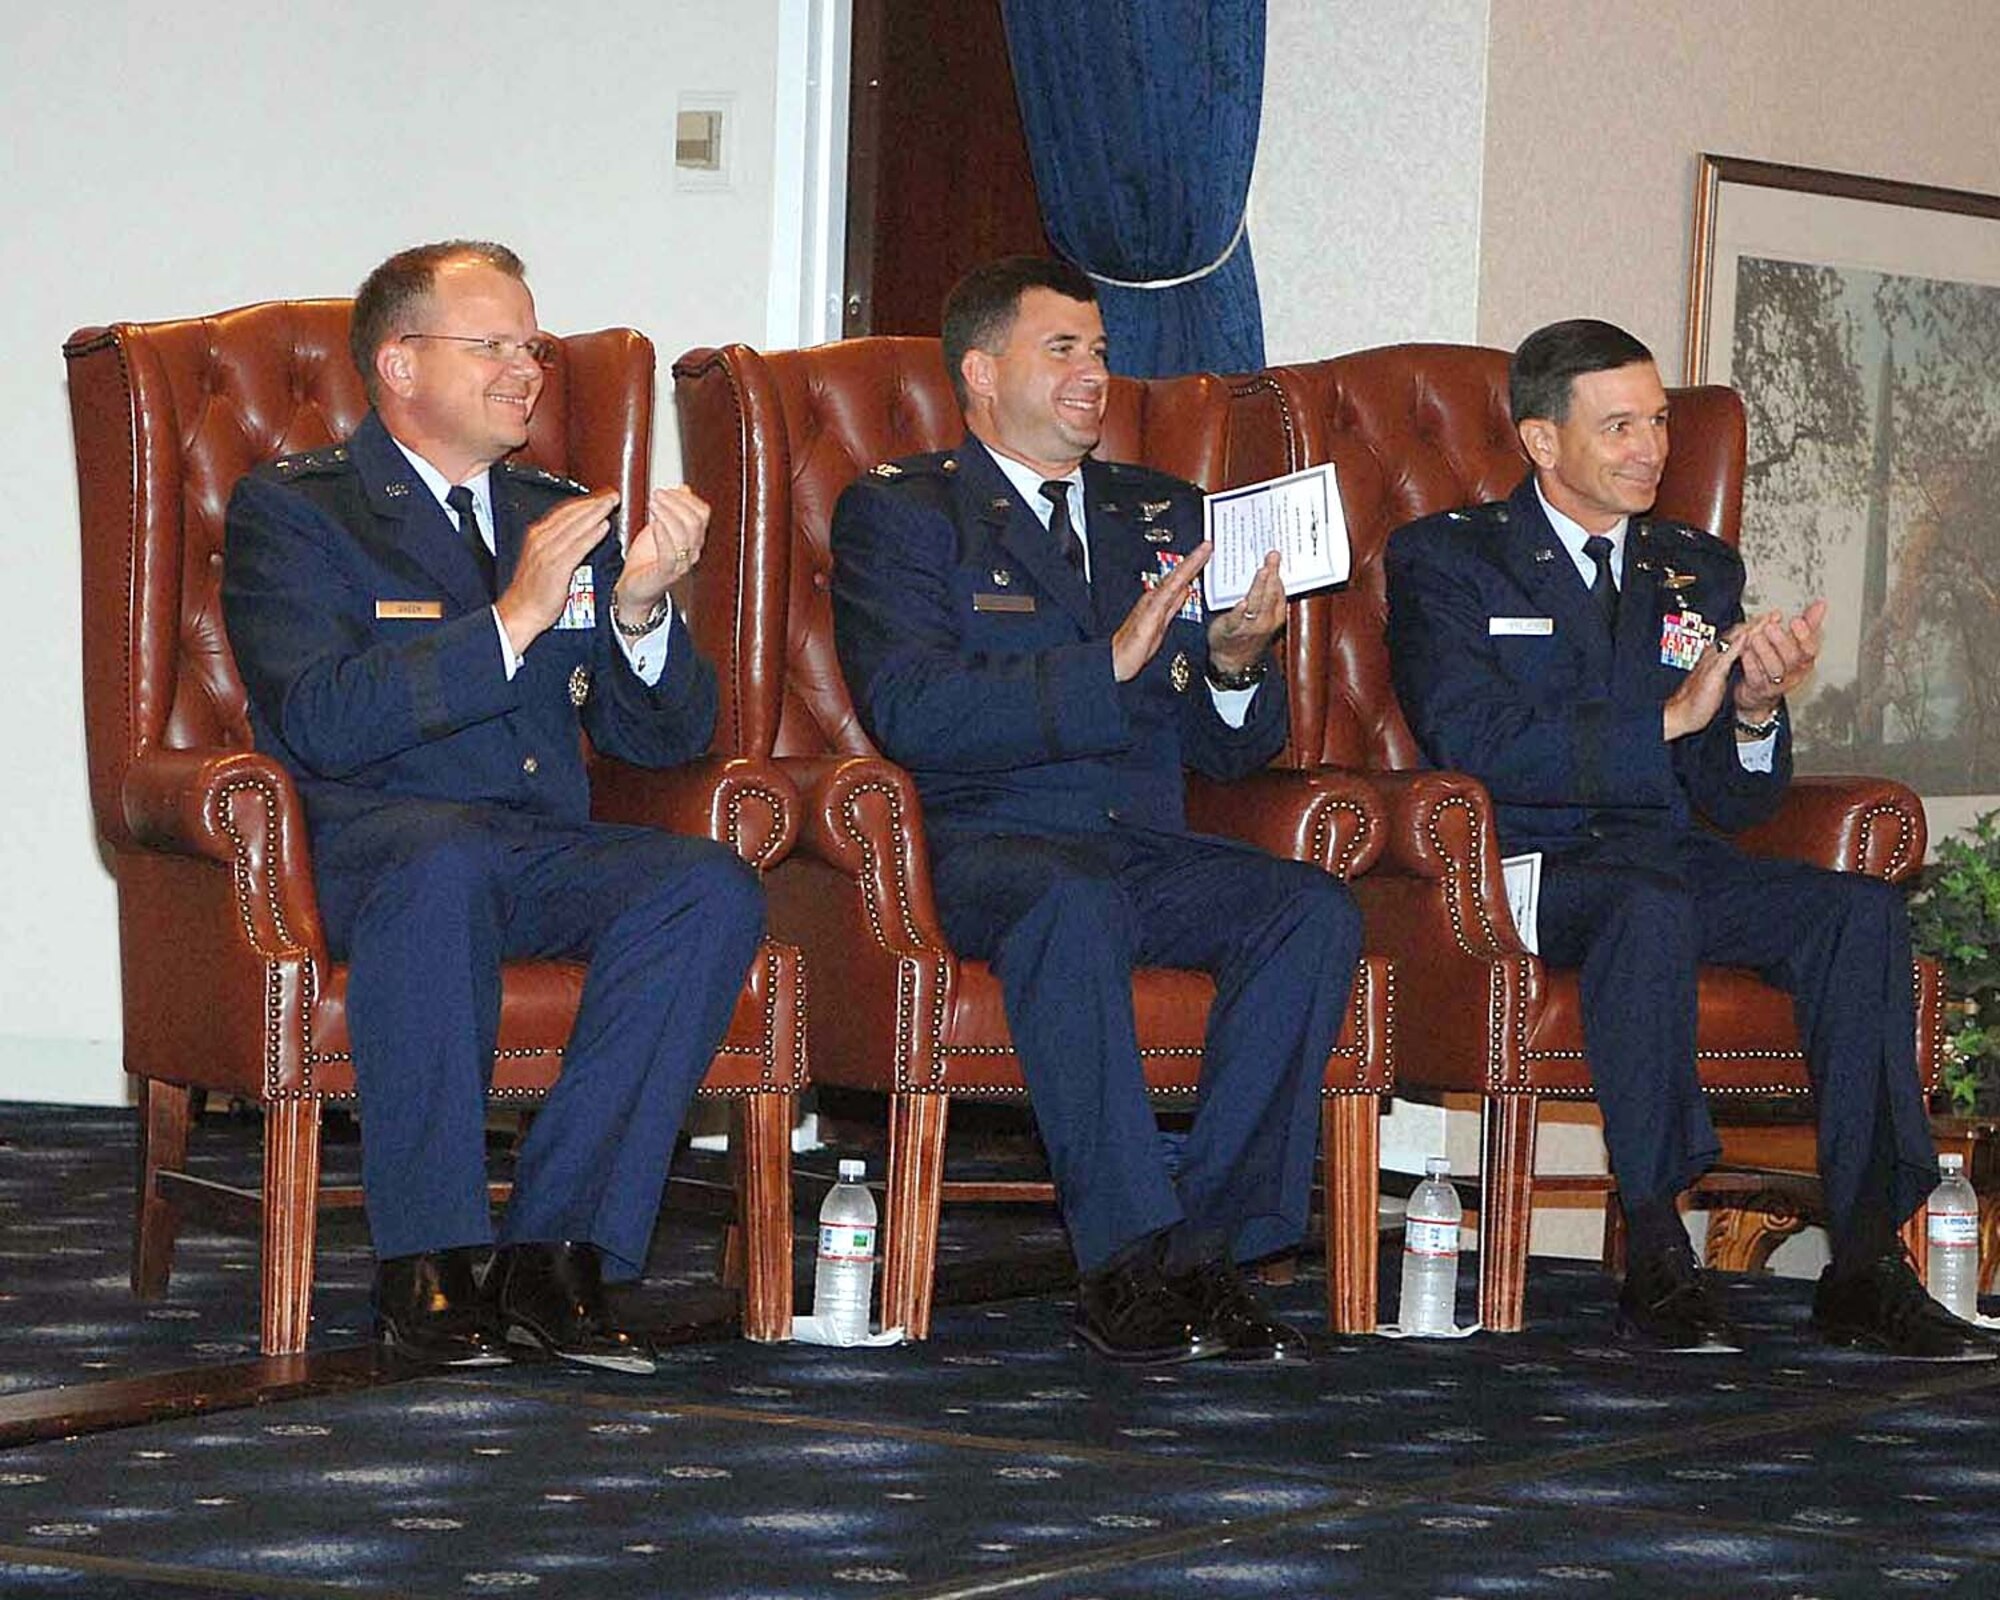 Maj. Gen. (Dr.) Bruce Green, Air Force deputy surgeon general, left, presided over the Sept. 5 change of command ceremony in which Brig. Gen. (Dr.) Byron Hepburn, right, assumed command of the Air Force Medical Support Agency from Col. (Dr.) Brian Masterson, center.  (U.S. Air Force photo)